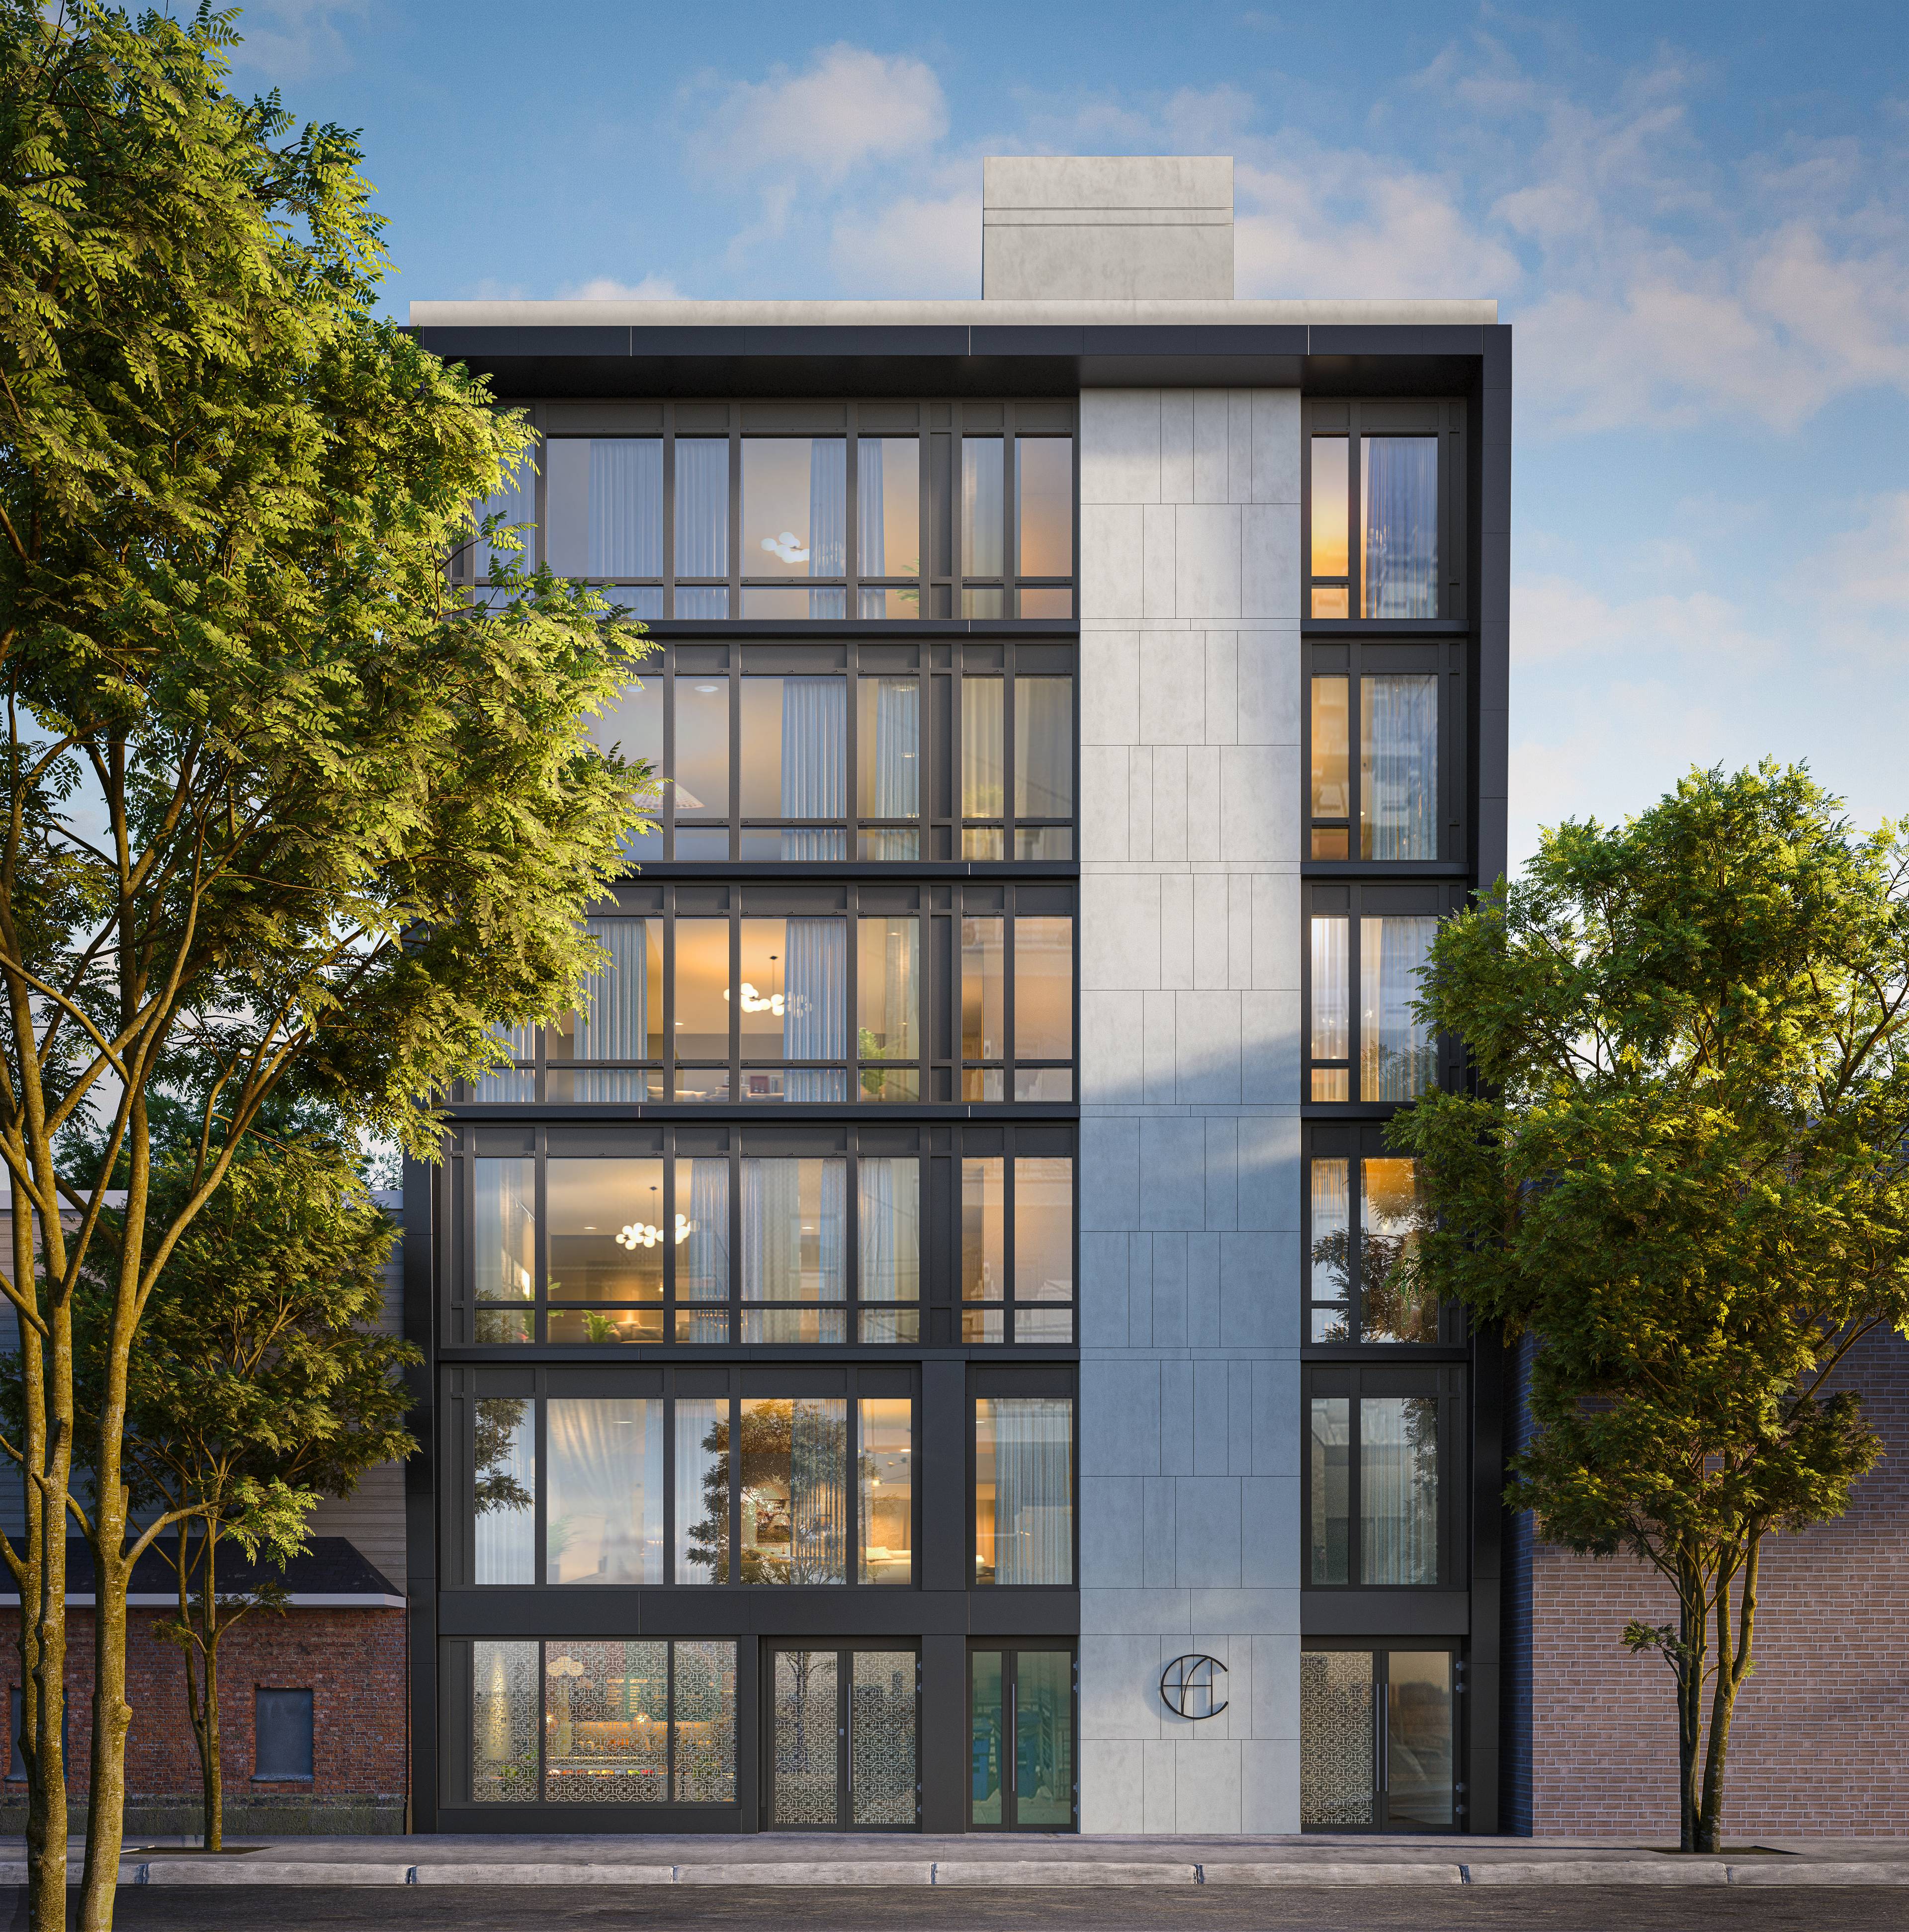 BRAND NEW LUXURY CONDOS IN THE HEART OF NORTH WILLIAMSBURG | 29 HAVEMEYER